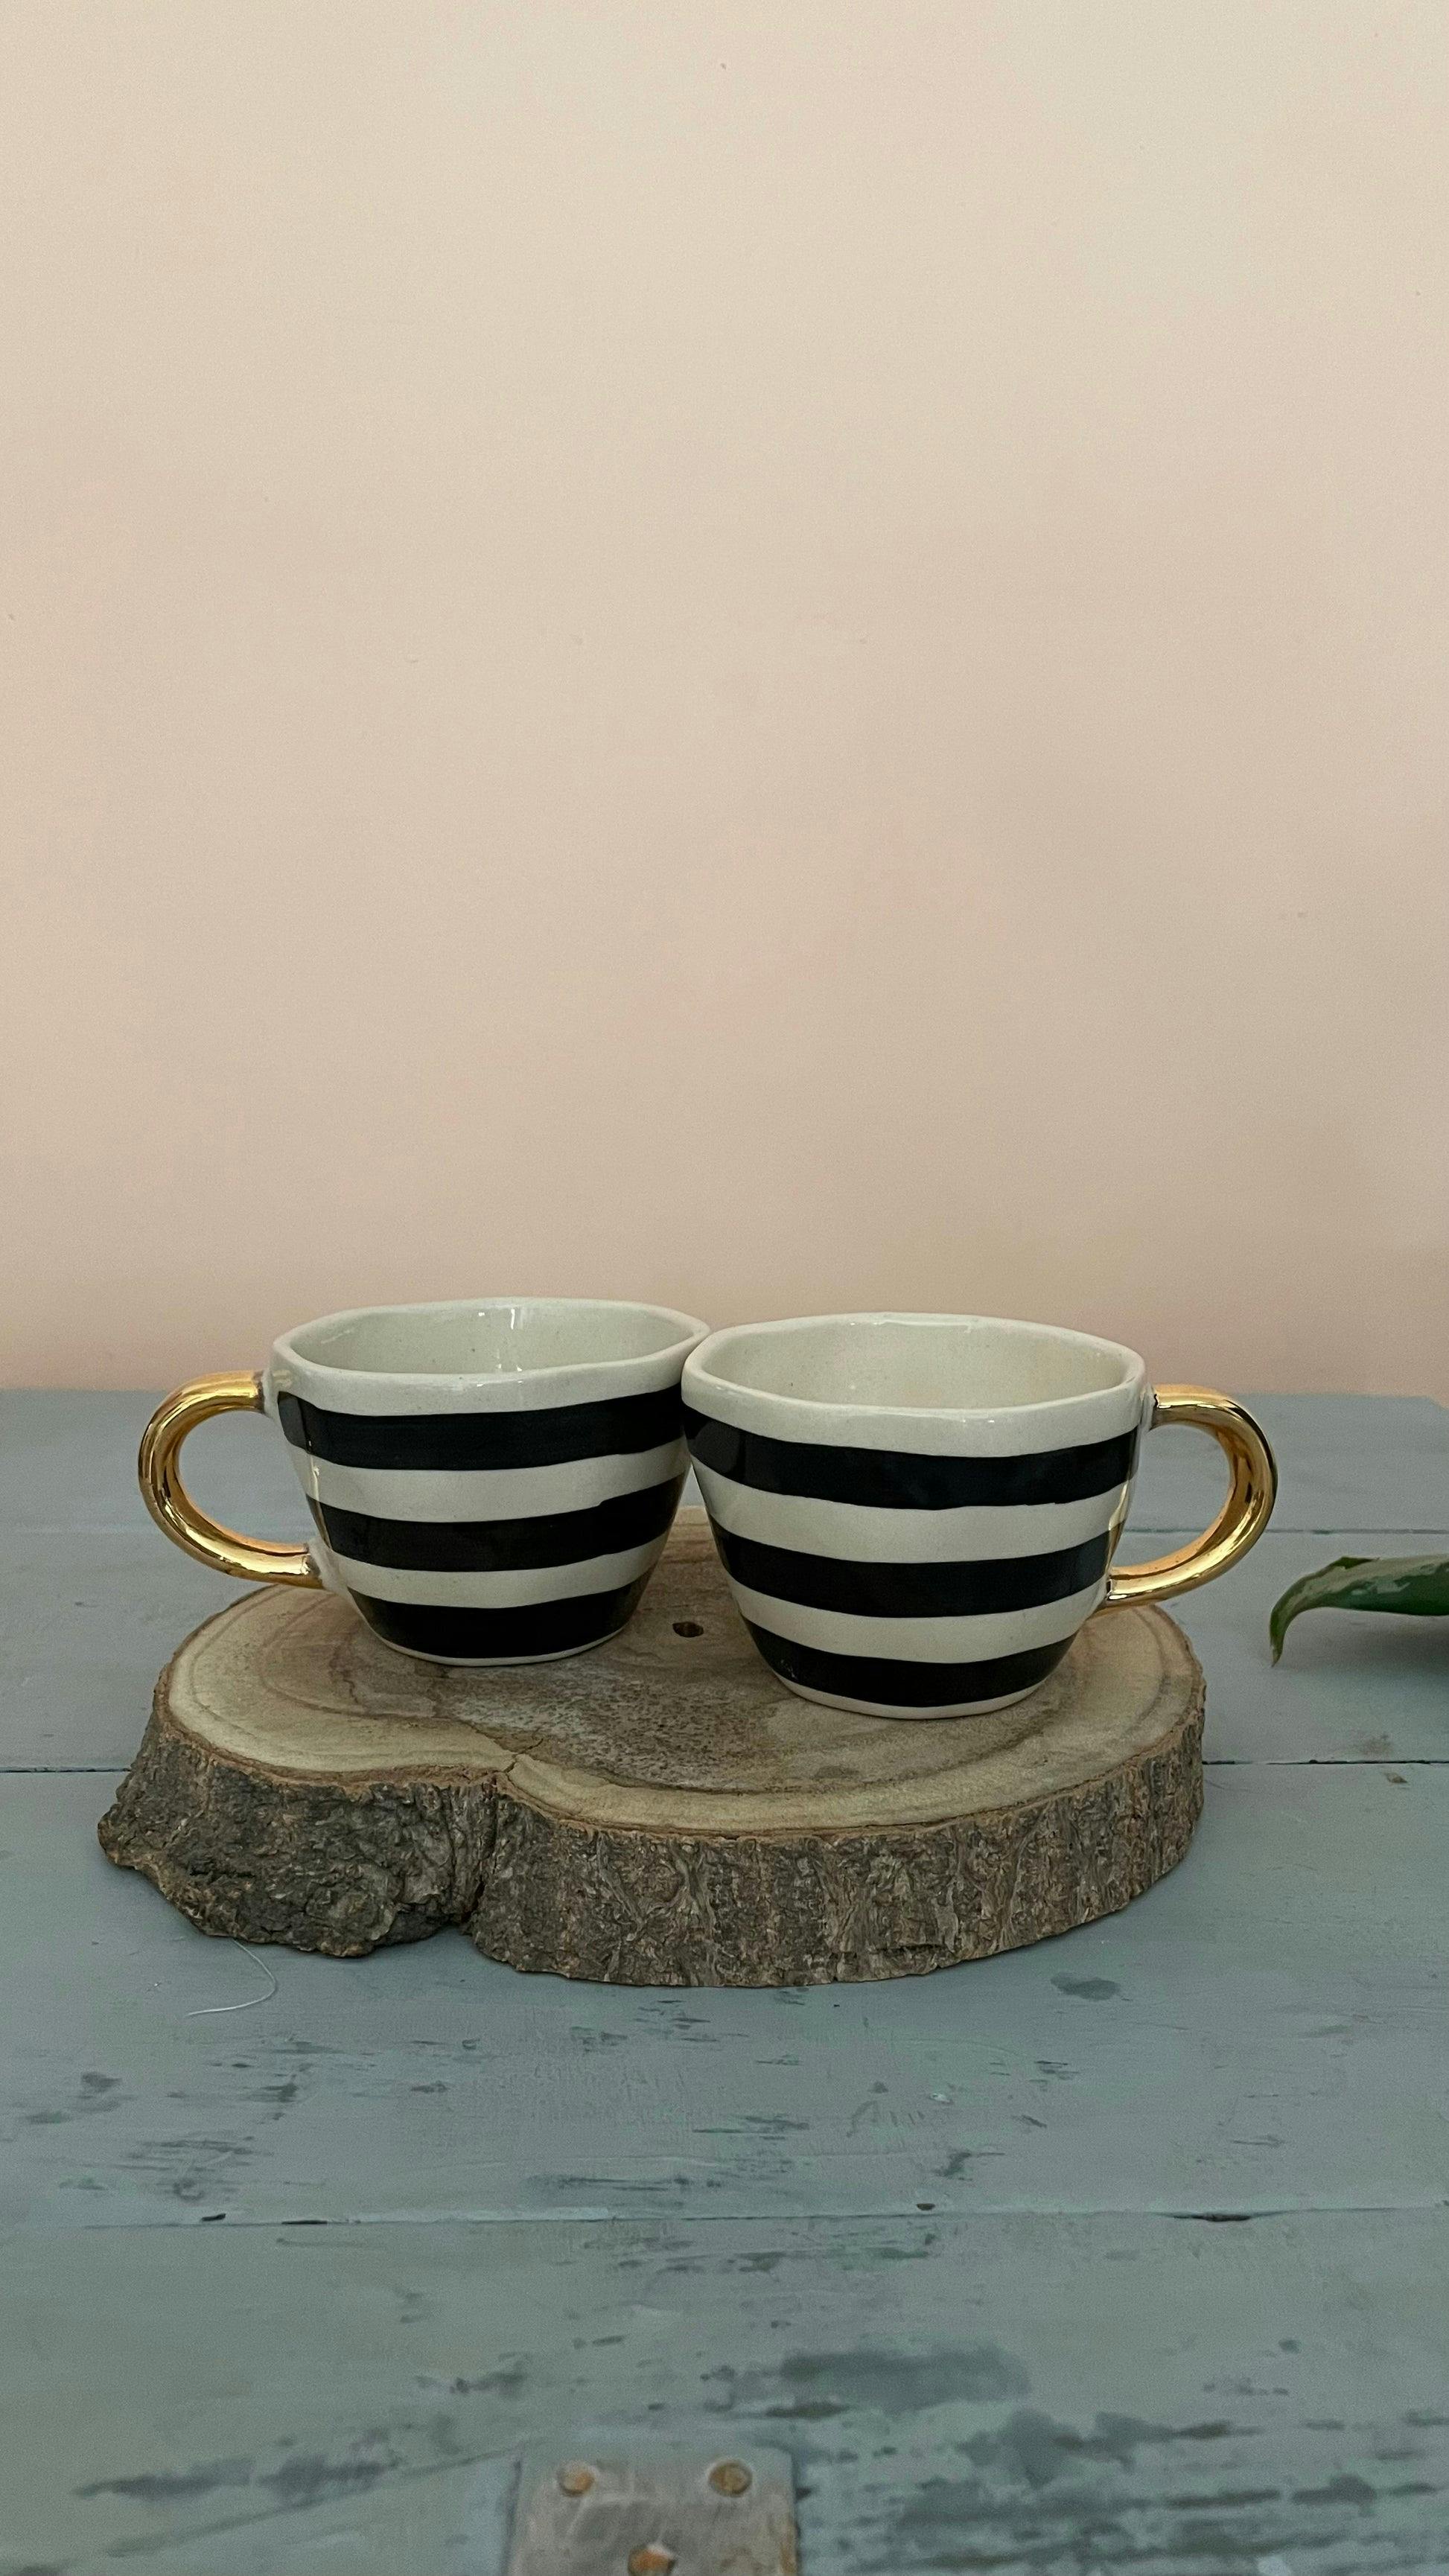 Broad Stripe Hand Painted Mugs - Set of 2, a product by Oh Yay project